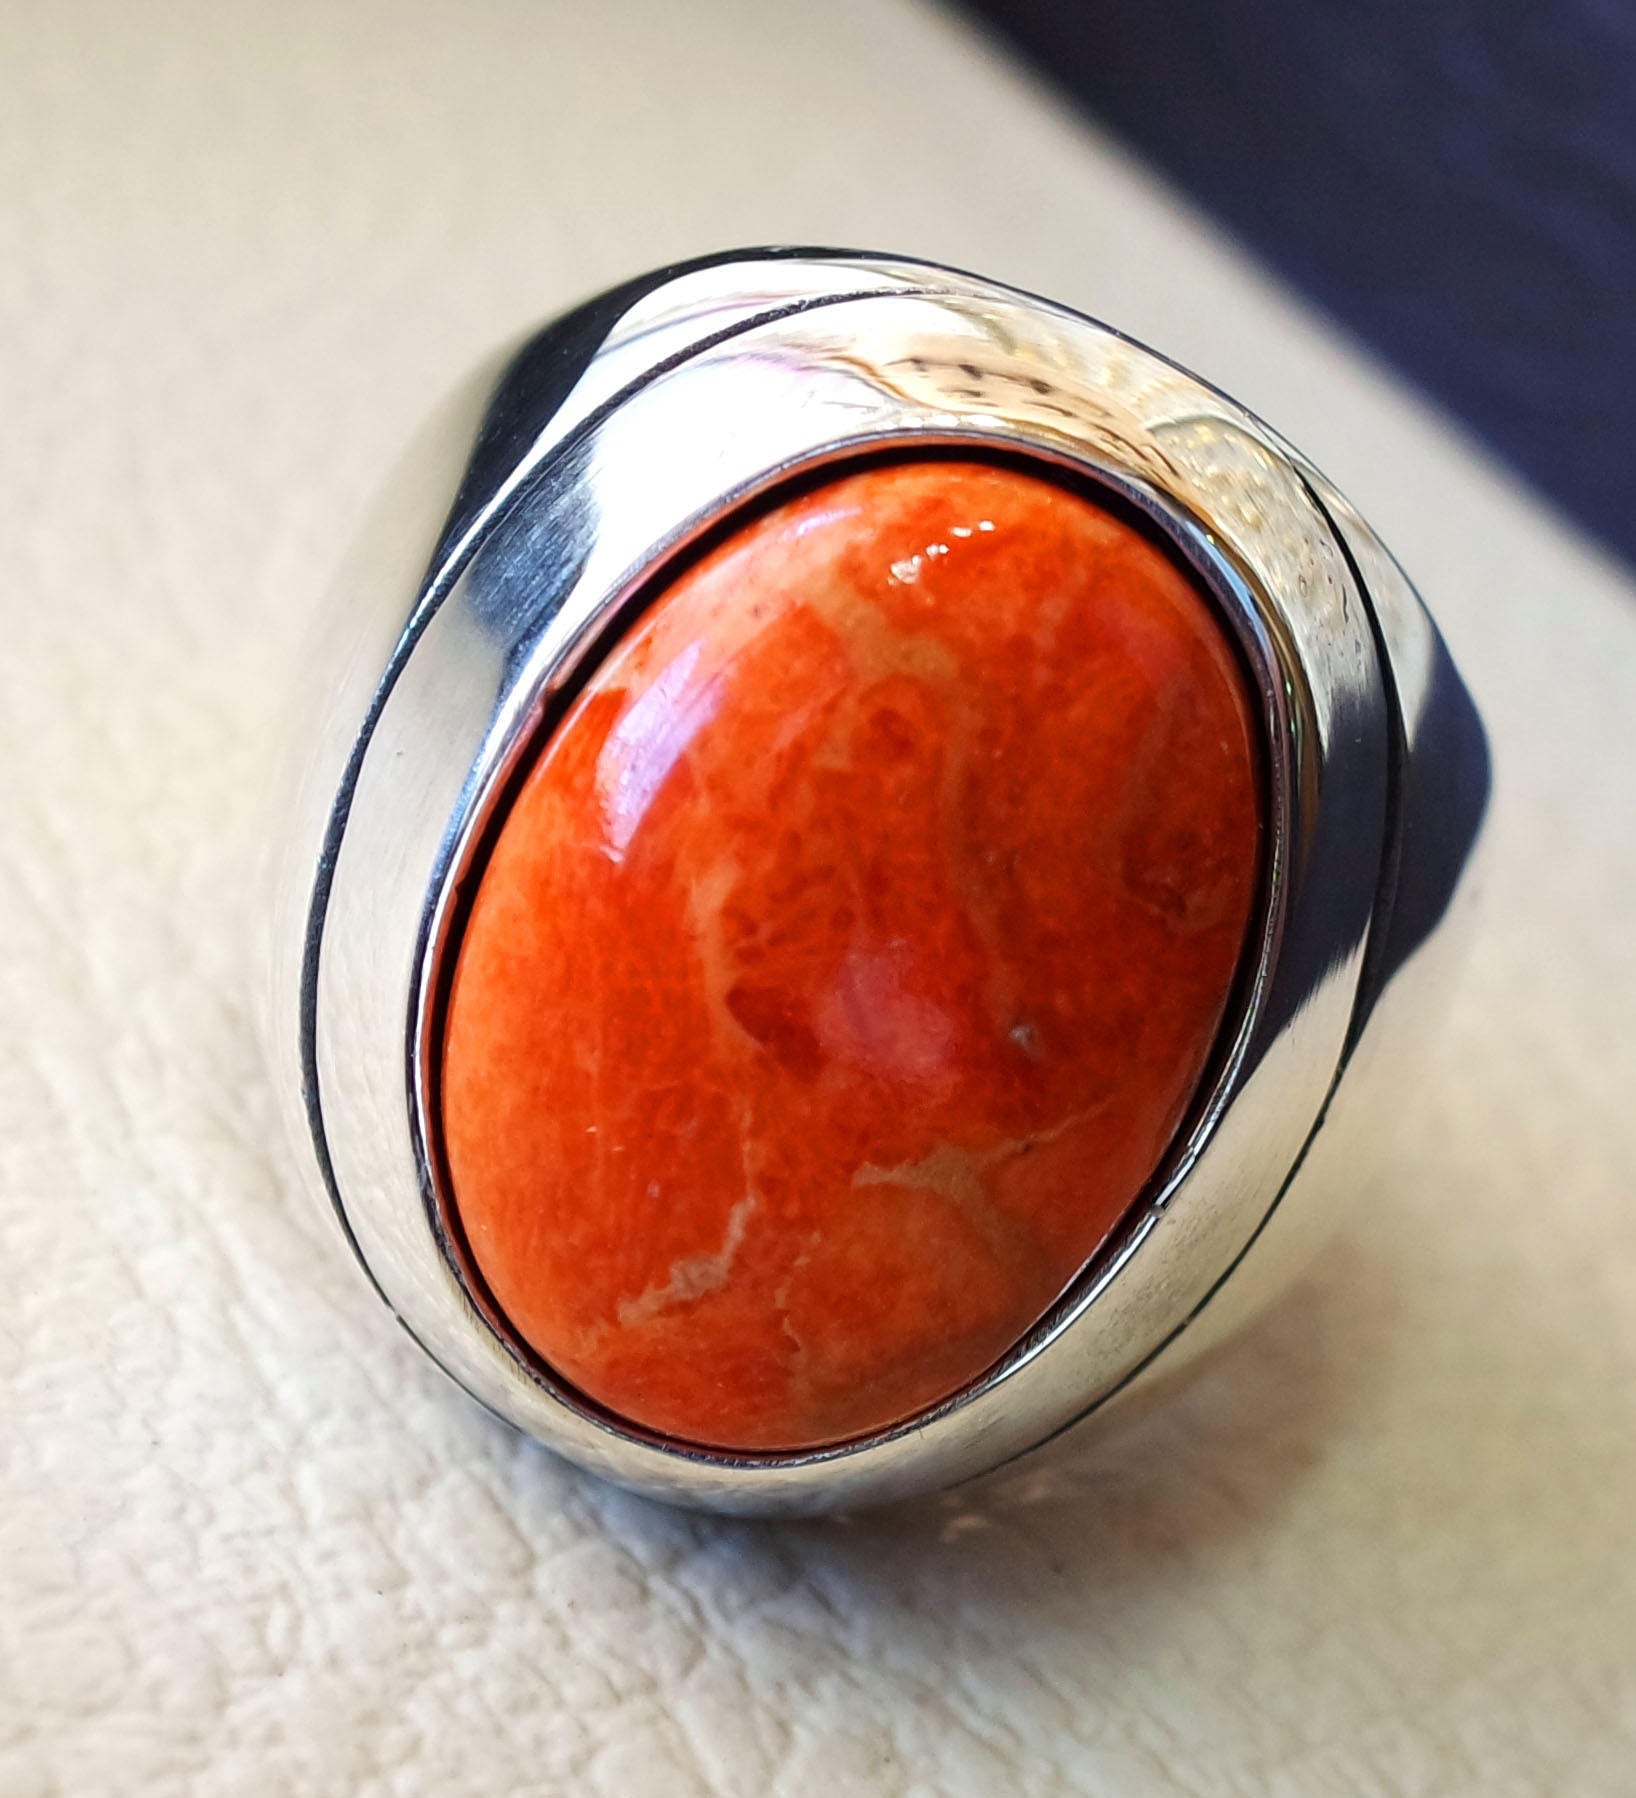 What Should Be The Ideal Weight Of Coral Gemstones?